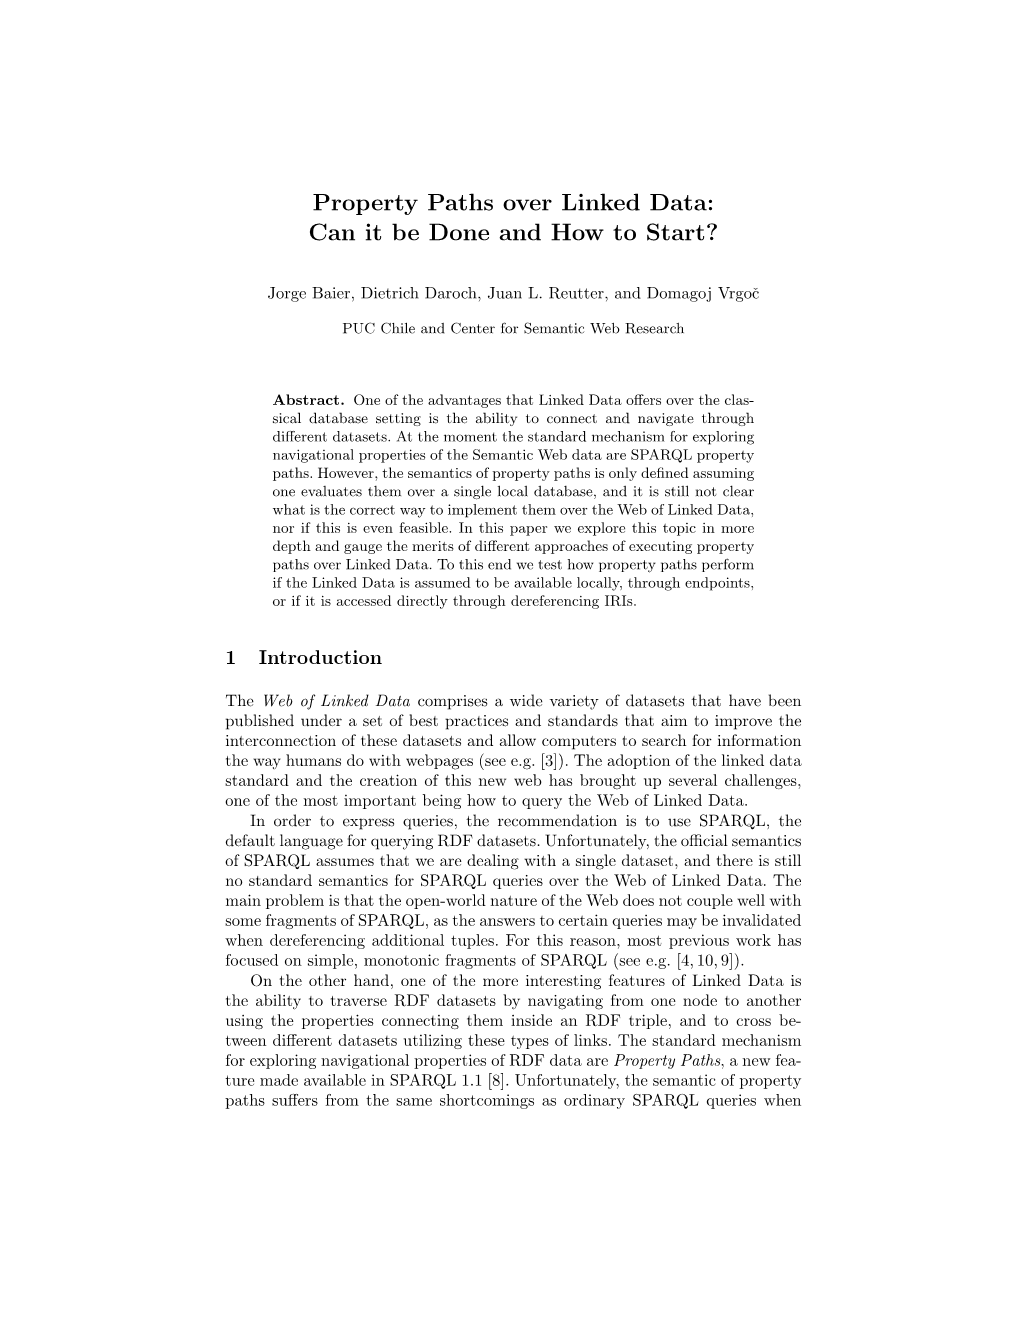 Property Paths Over Linked Data: Can It Be Done and How to Start?